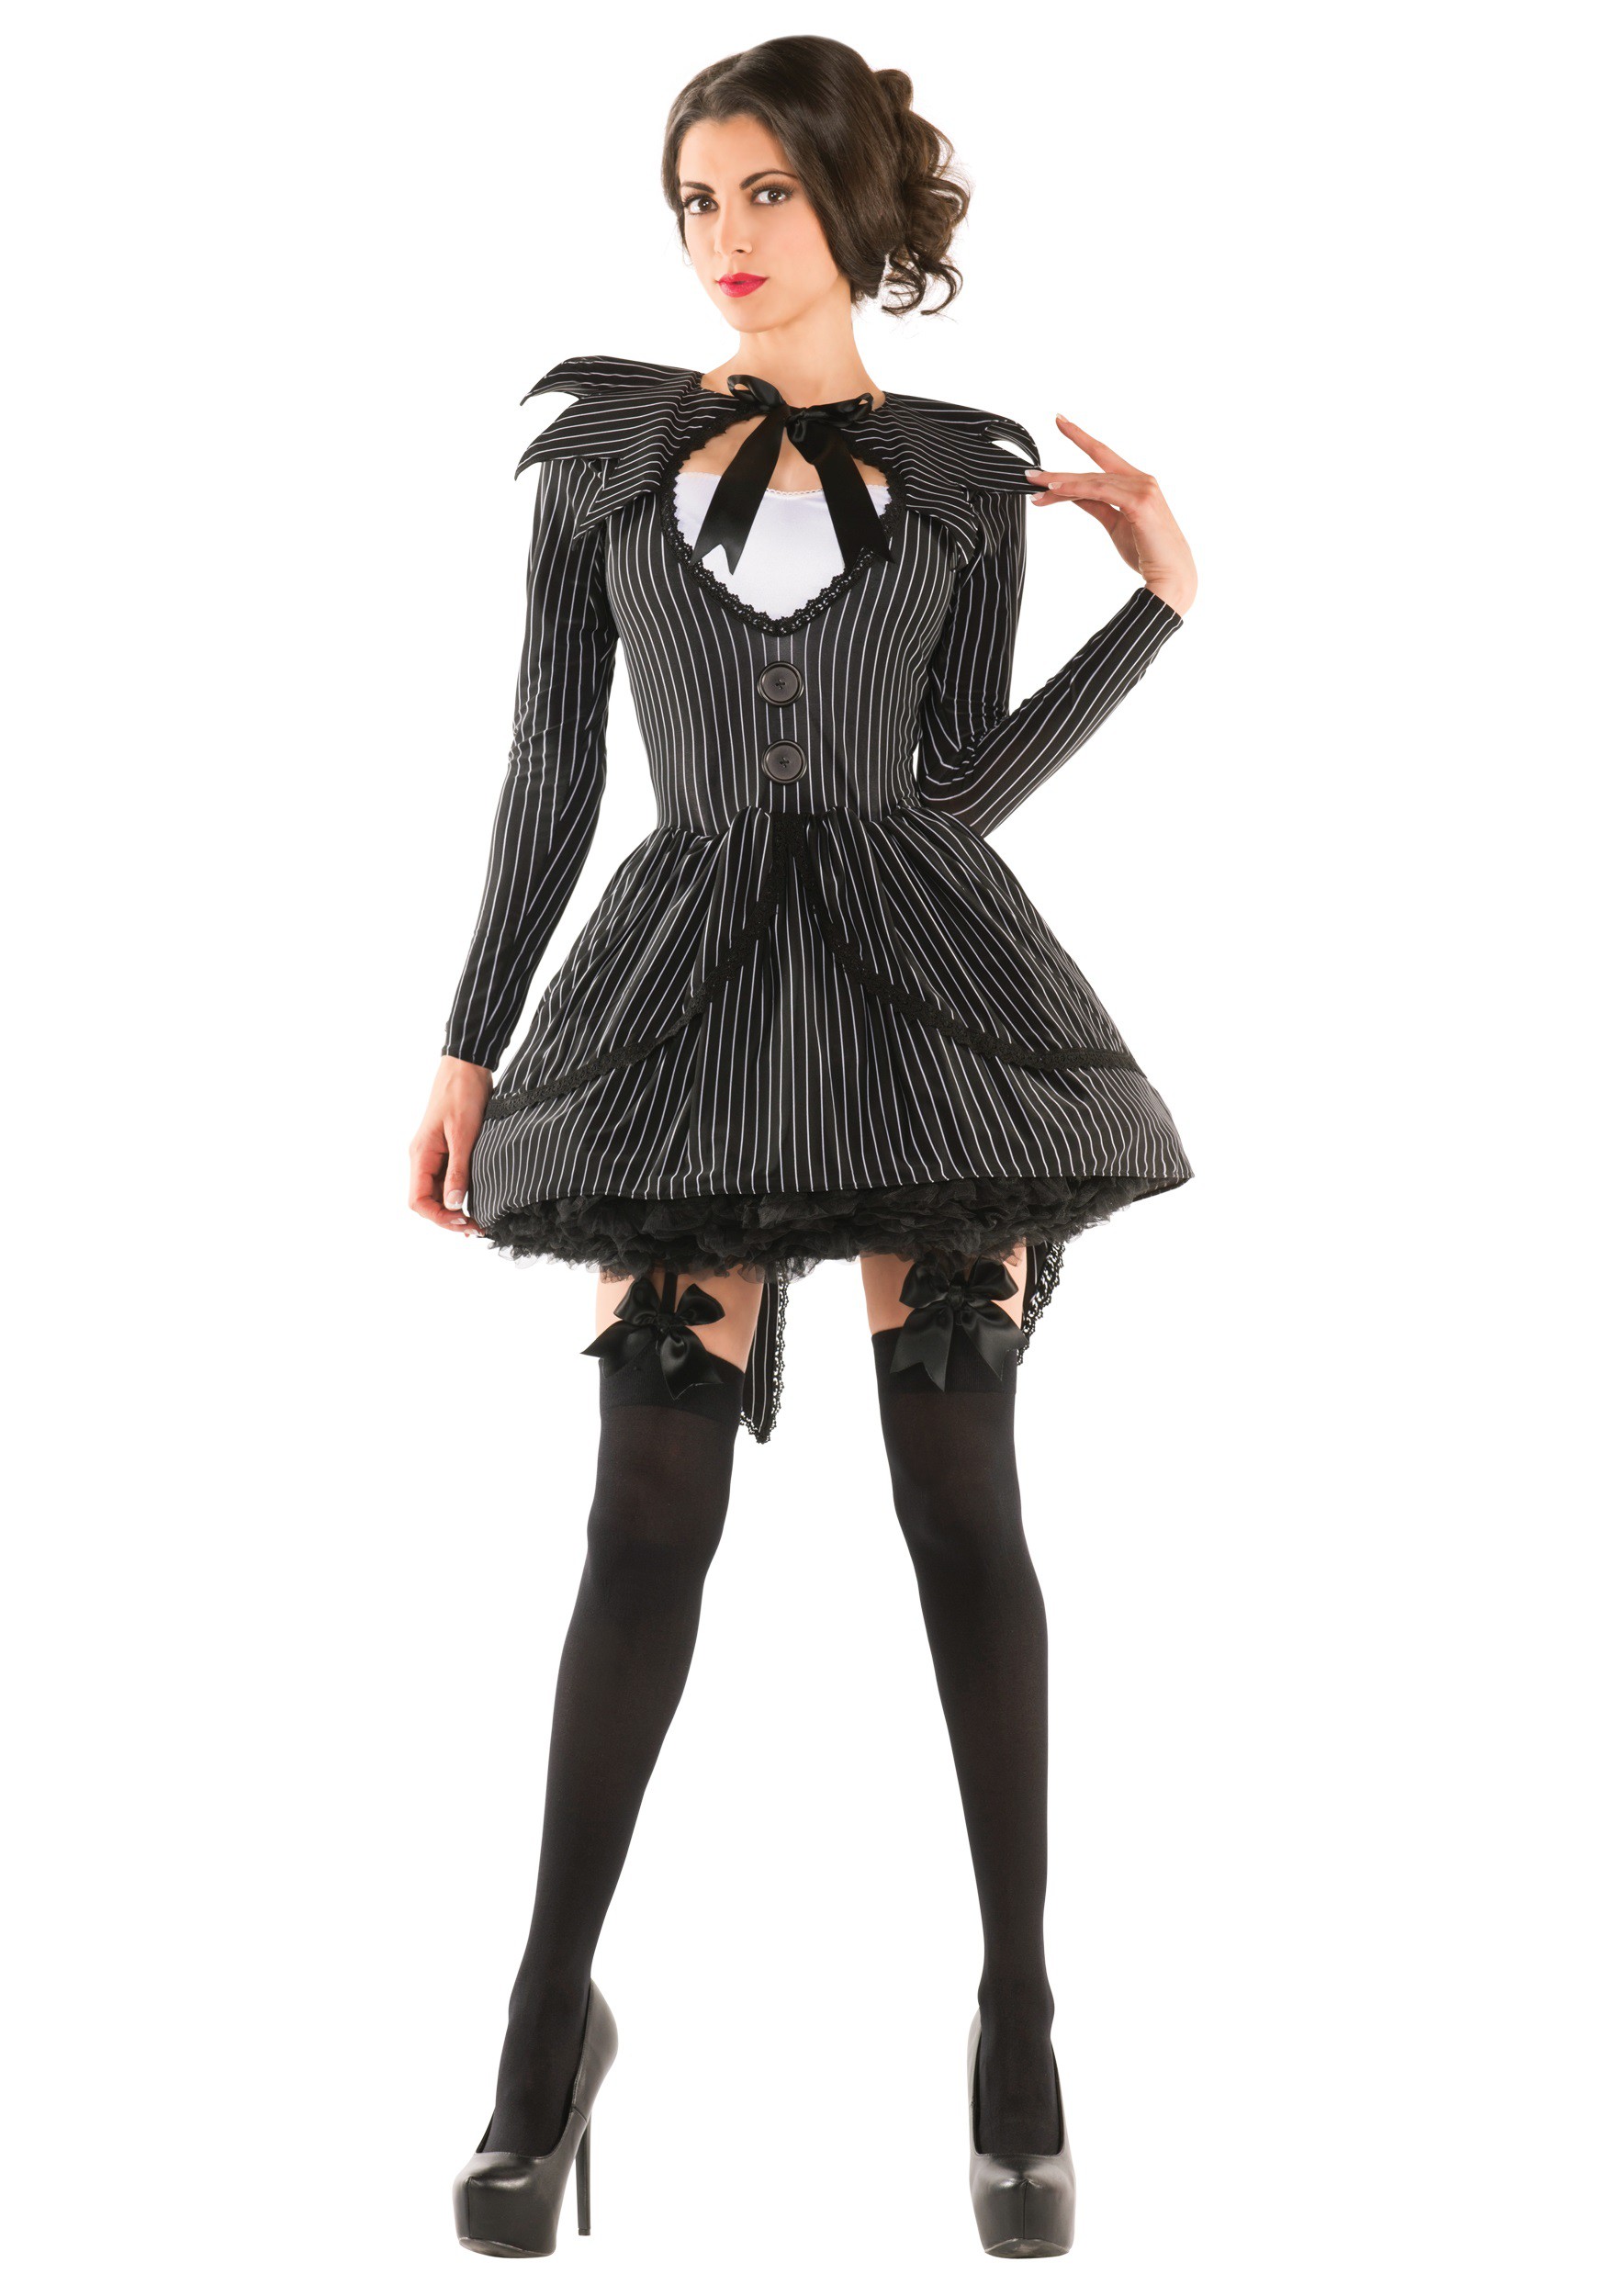 Adult Size Bad Dreams Babe Costume